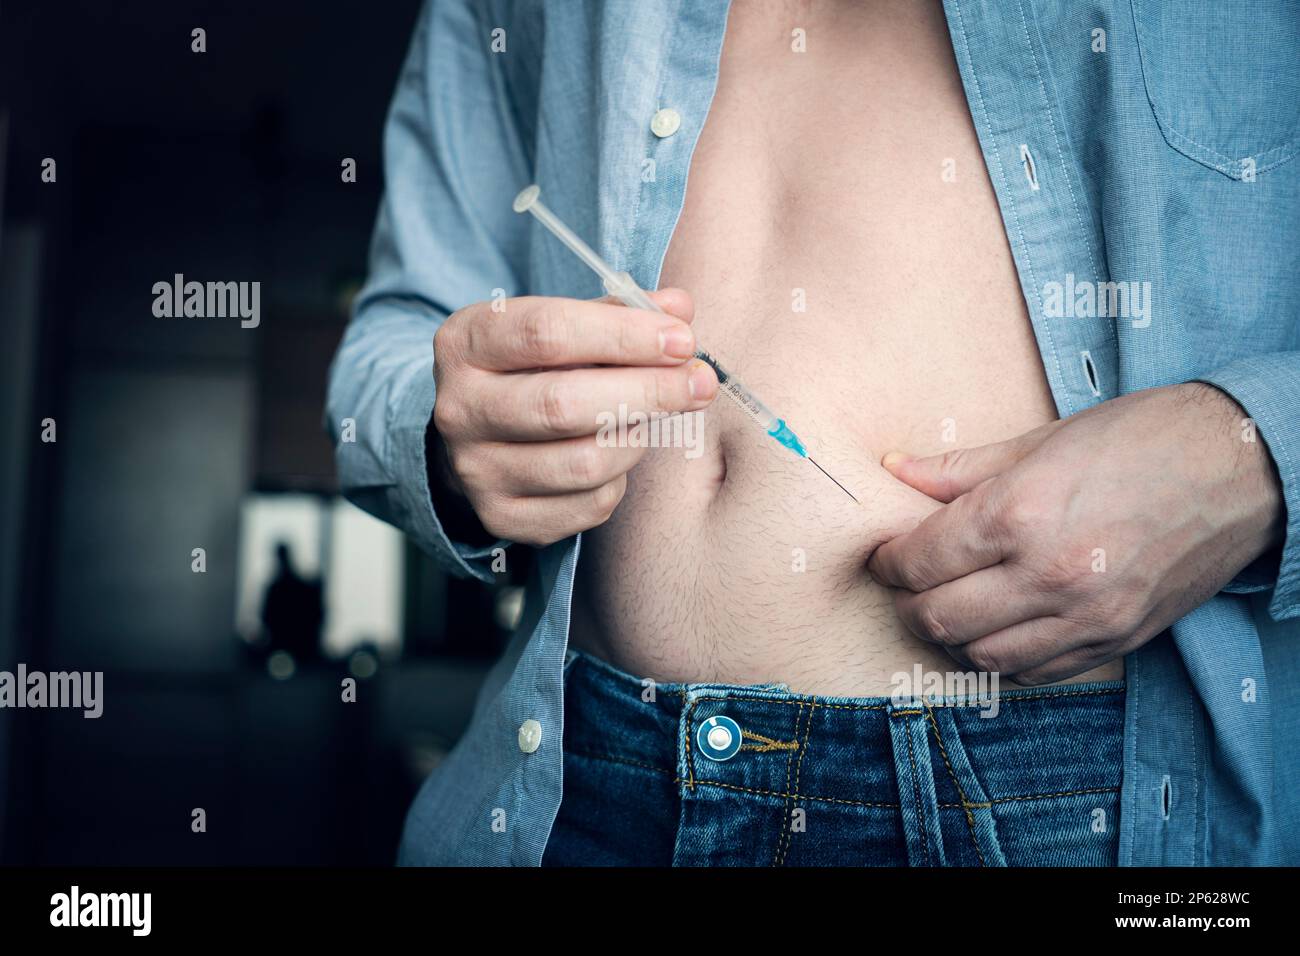 young man hand using insulin syringe close up . injecting insulin at home. self-medication Stock Photo